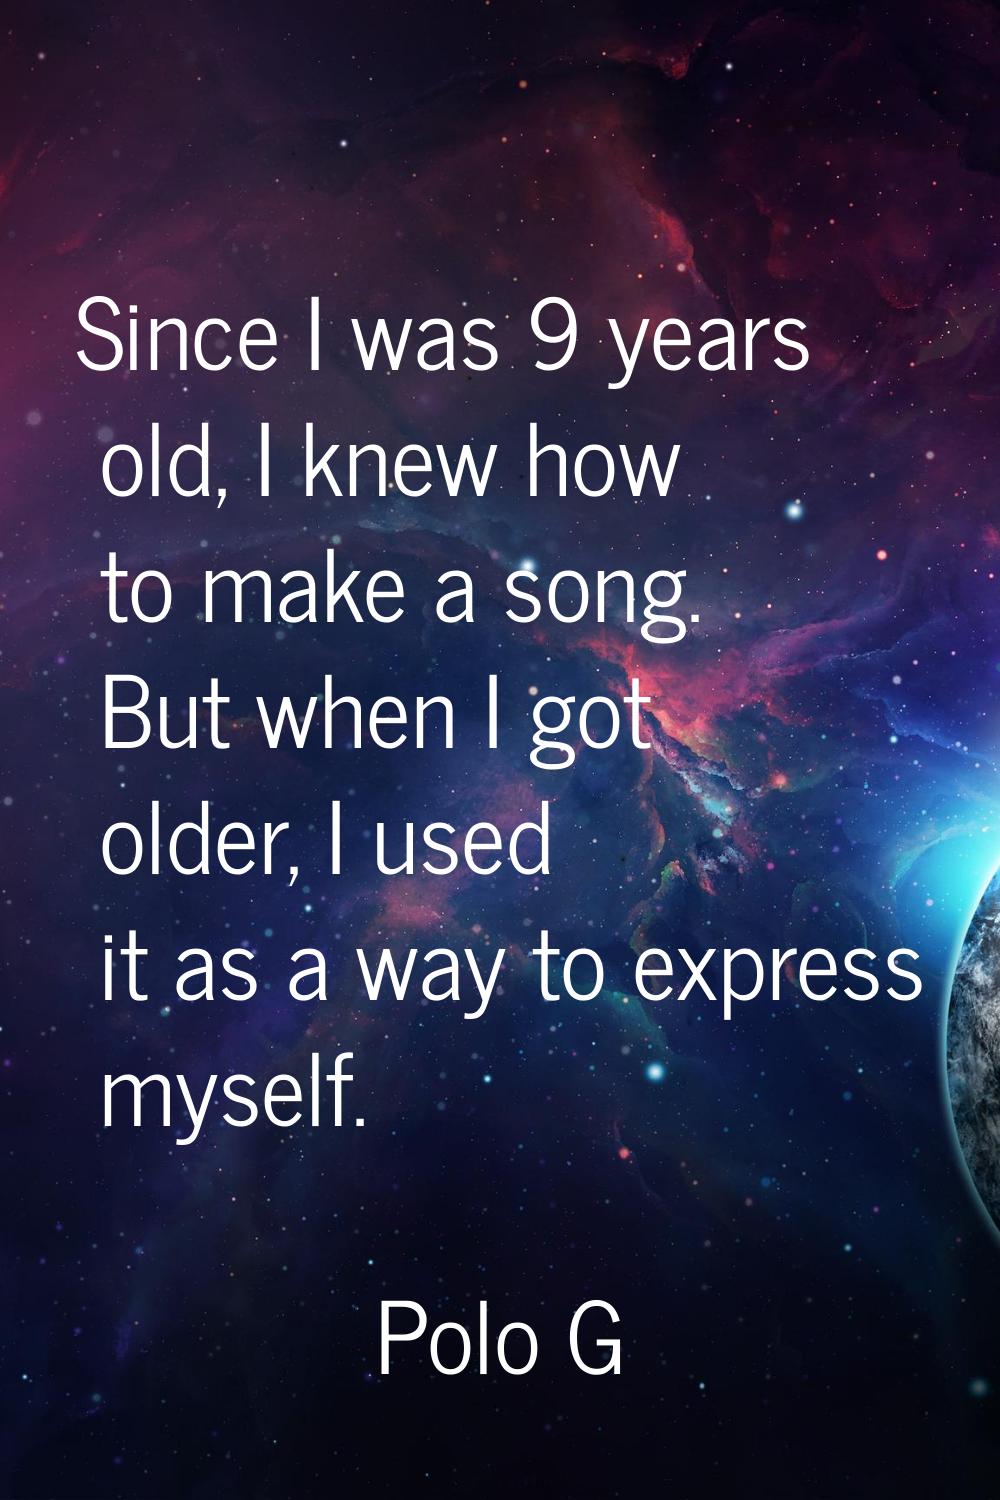 Since I was 9 years old, I knew how to make a song. But when I got older, I used it as a way to exp